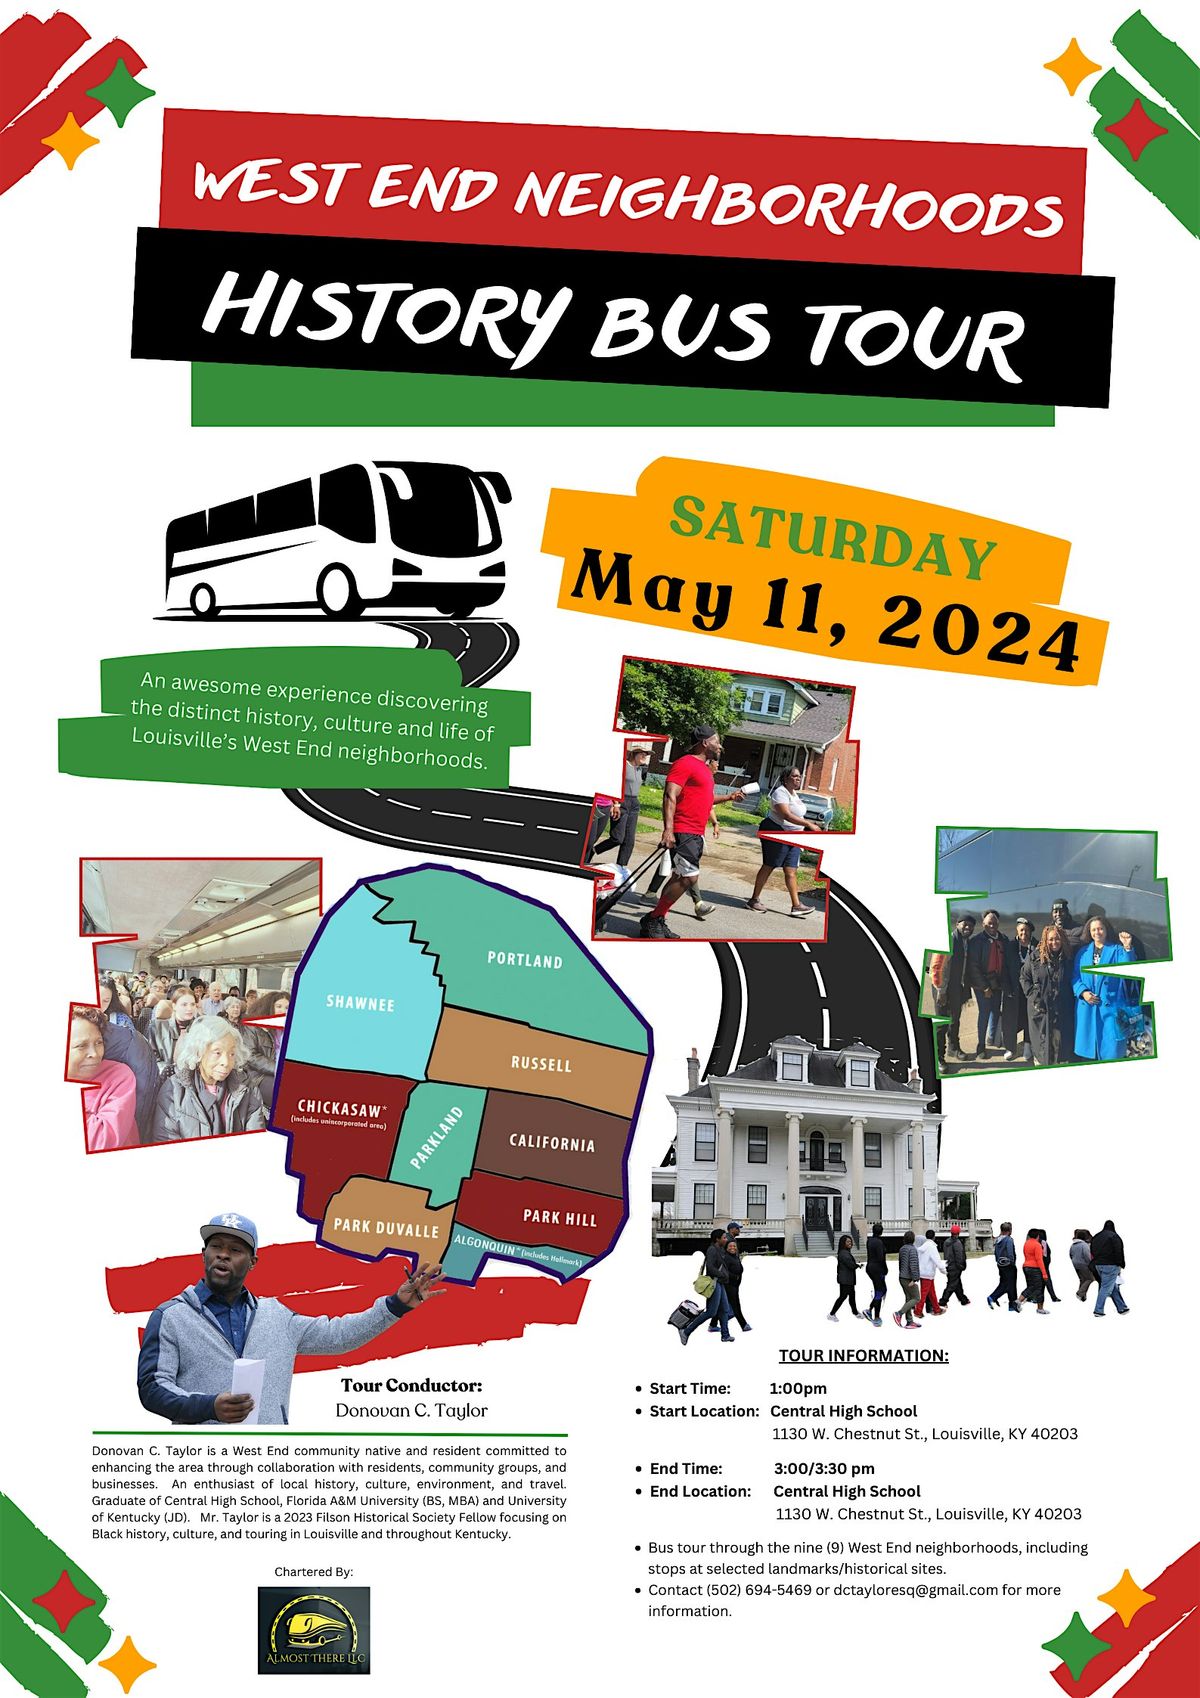 The West End Neighborhoods History Bus Tour